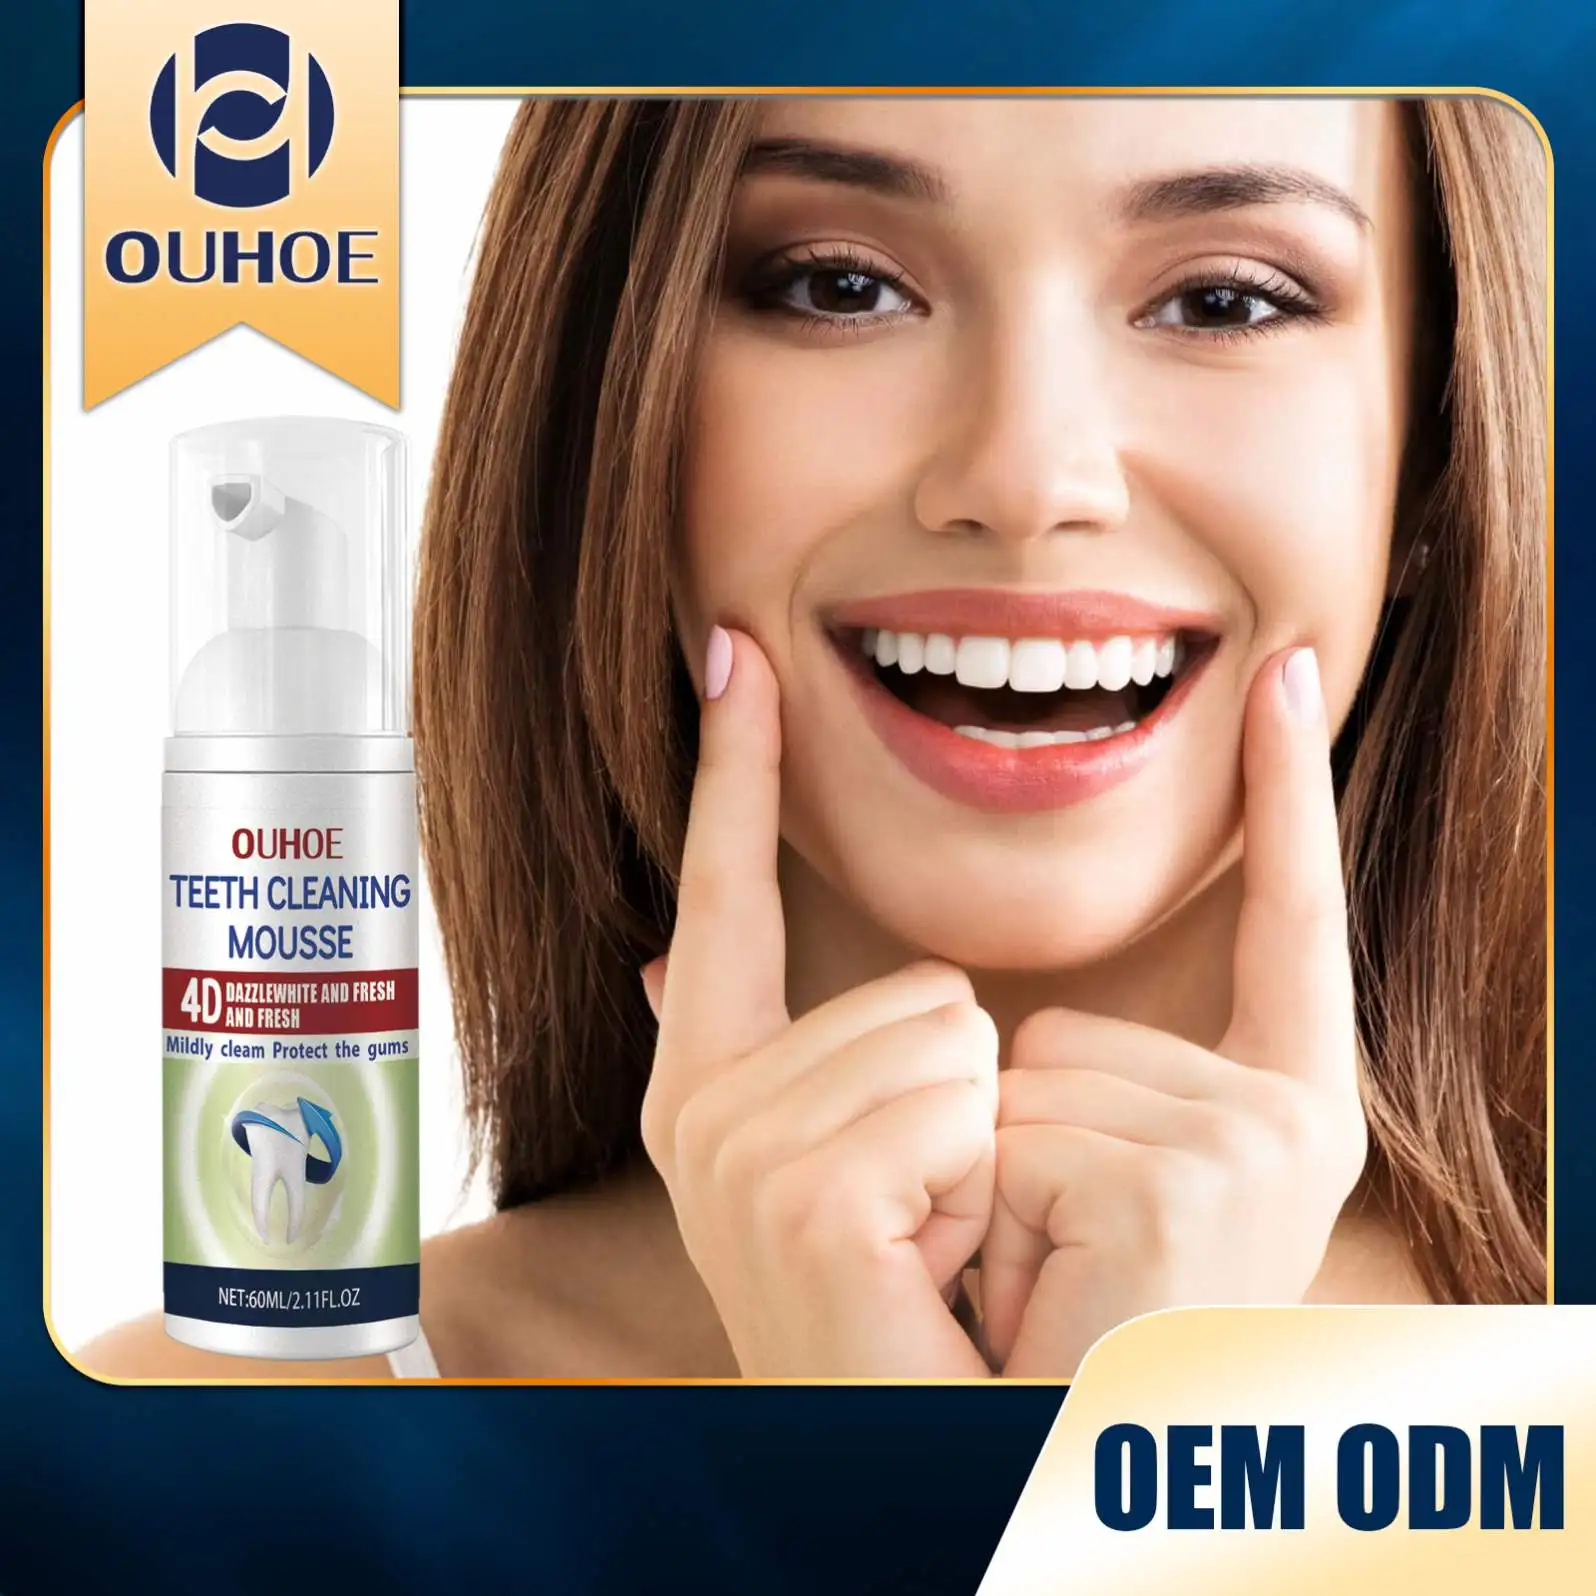 OUHOE 60ML Teeth Whitening Mousse Tooth Whitening Oral Hygiene Foam Bleaching Cleaning White Teeth Toothpaste Remove Stains